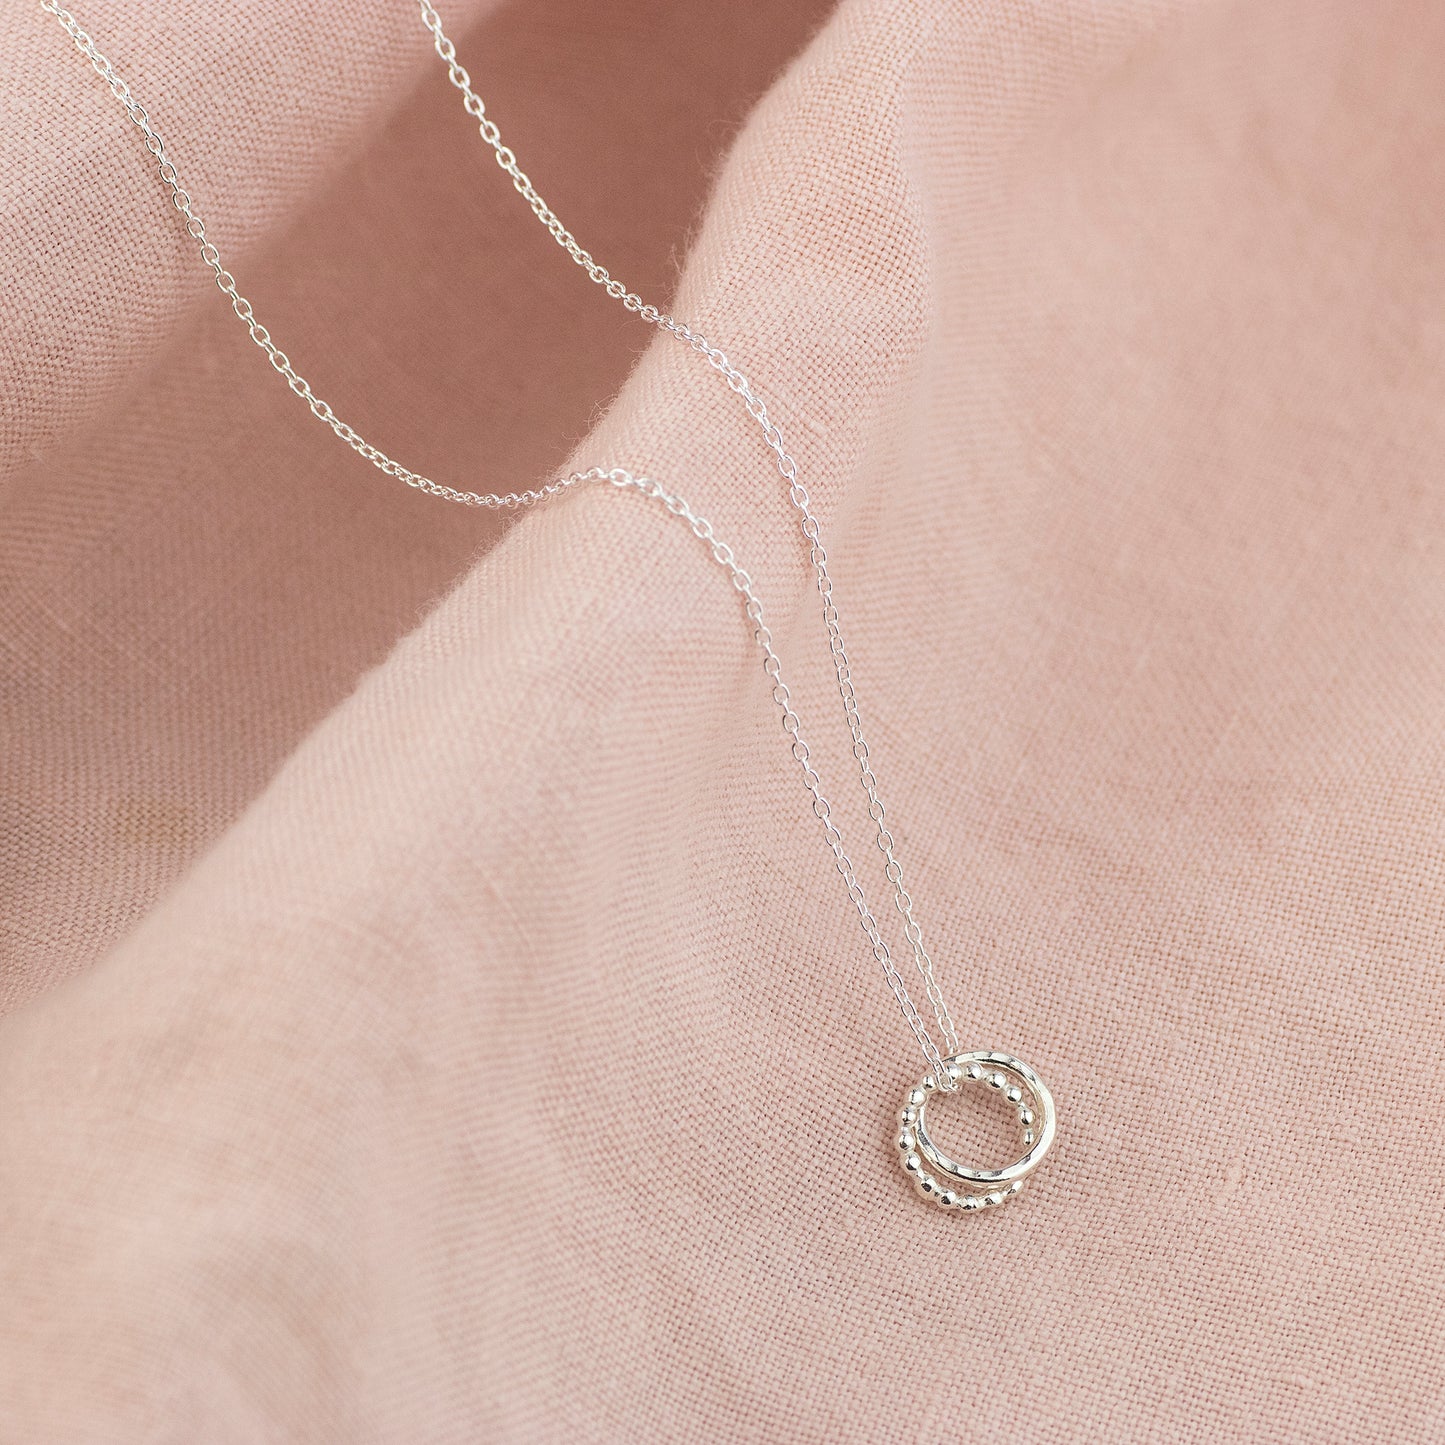 2nd Anniversary Necklace - Silver Love Knot- The Original 2 Links for 2 Years Necklace